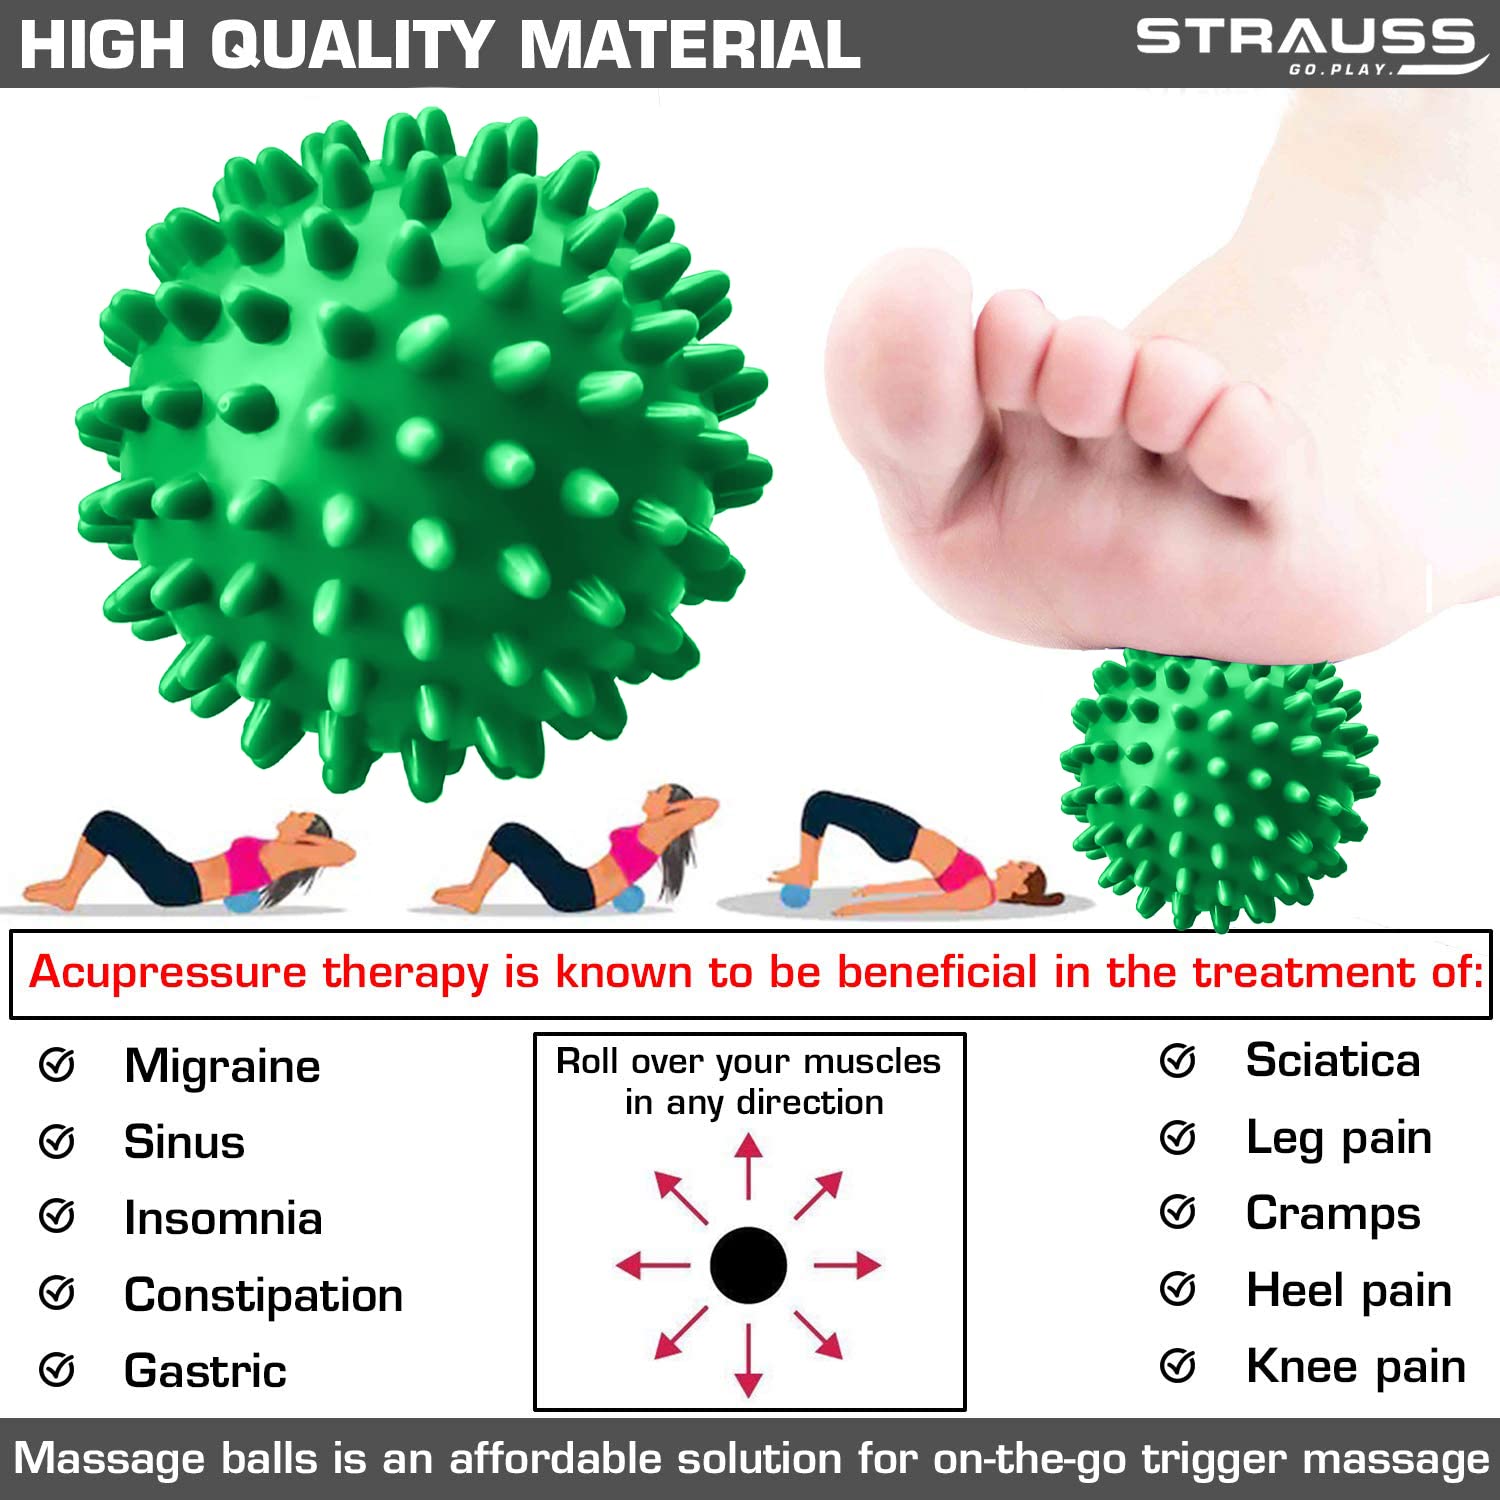 Strauss Acupressure Massage Ball, 3.5 inch | Ideal for Physiotherapy, Deep Tissue Massage, Trigger Point Therapy, Muscle Knots | Acupressure Therapy Ball for Myofascial Release & Pain Relief, (Green)